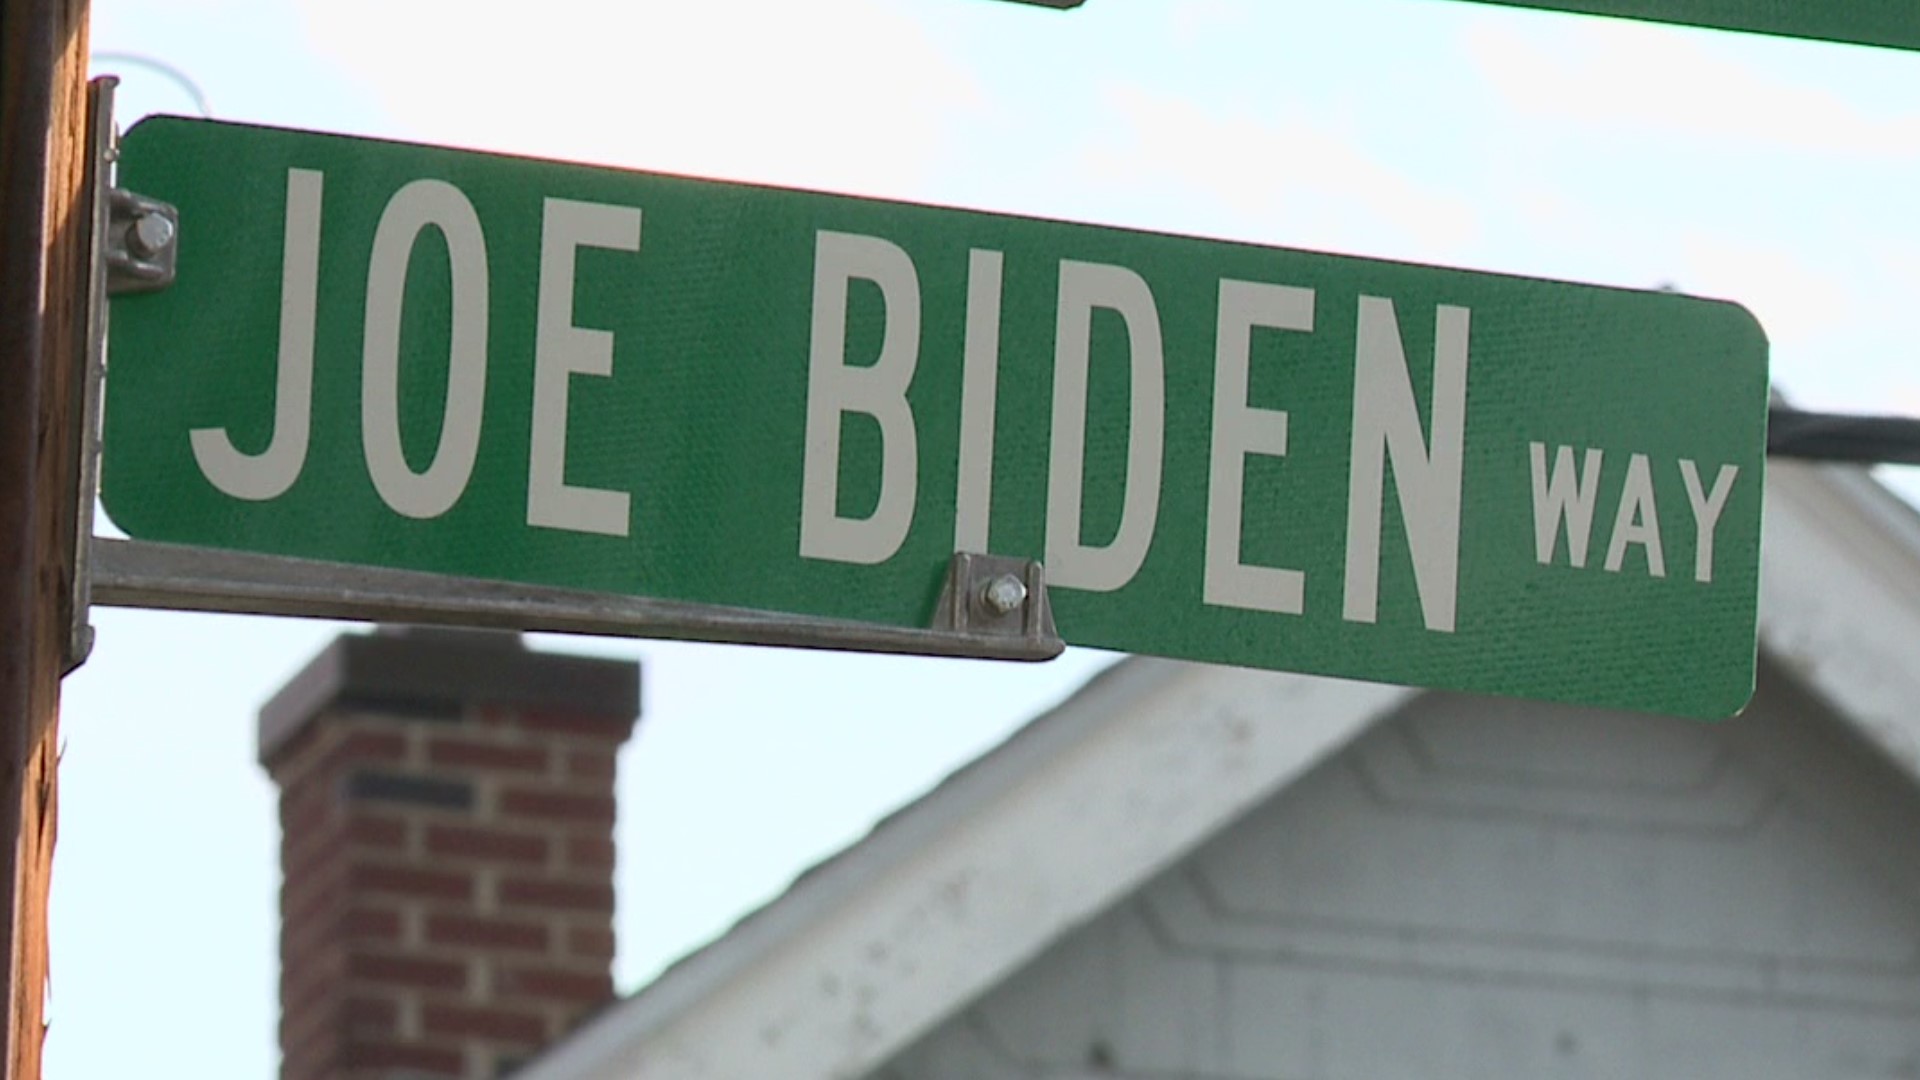 A special unveiling took place Friday for Scranton native and President-elect Joe Biden right in front of his childhood home.